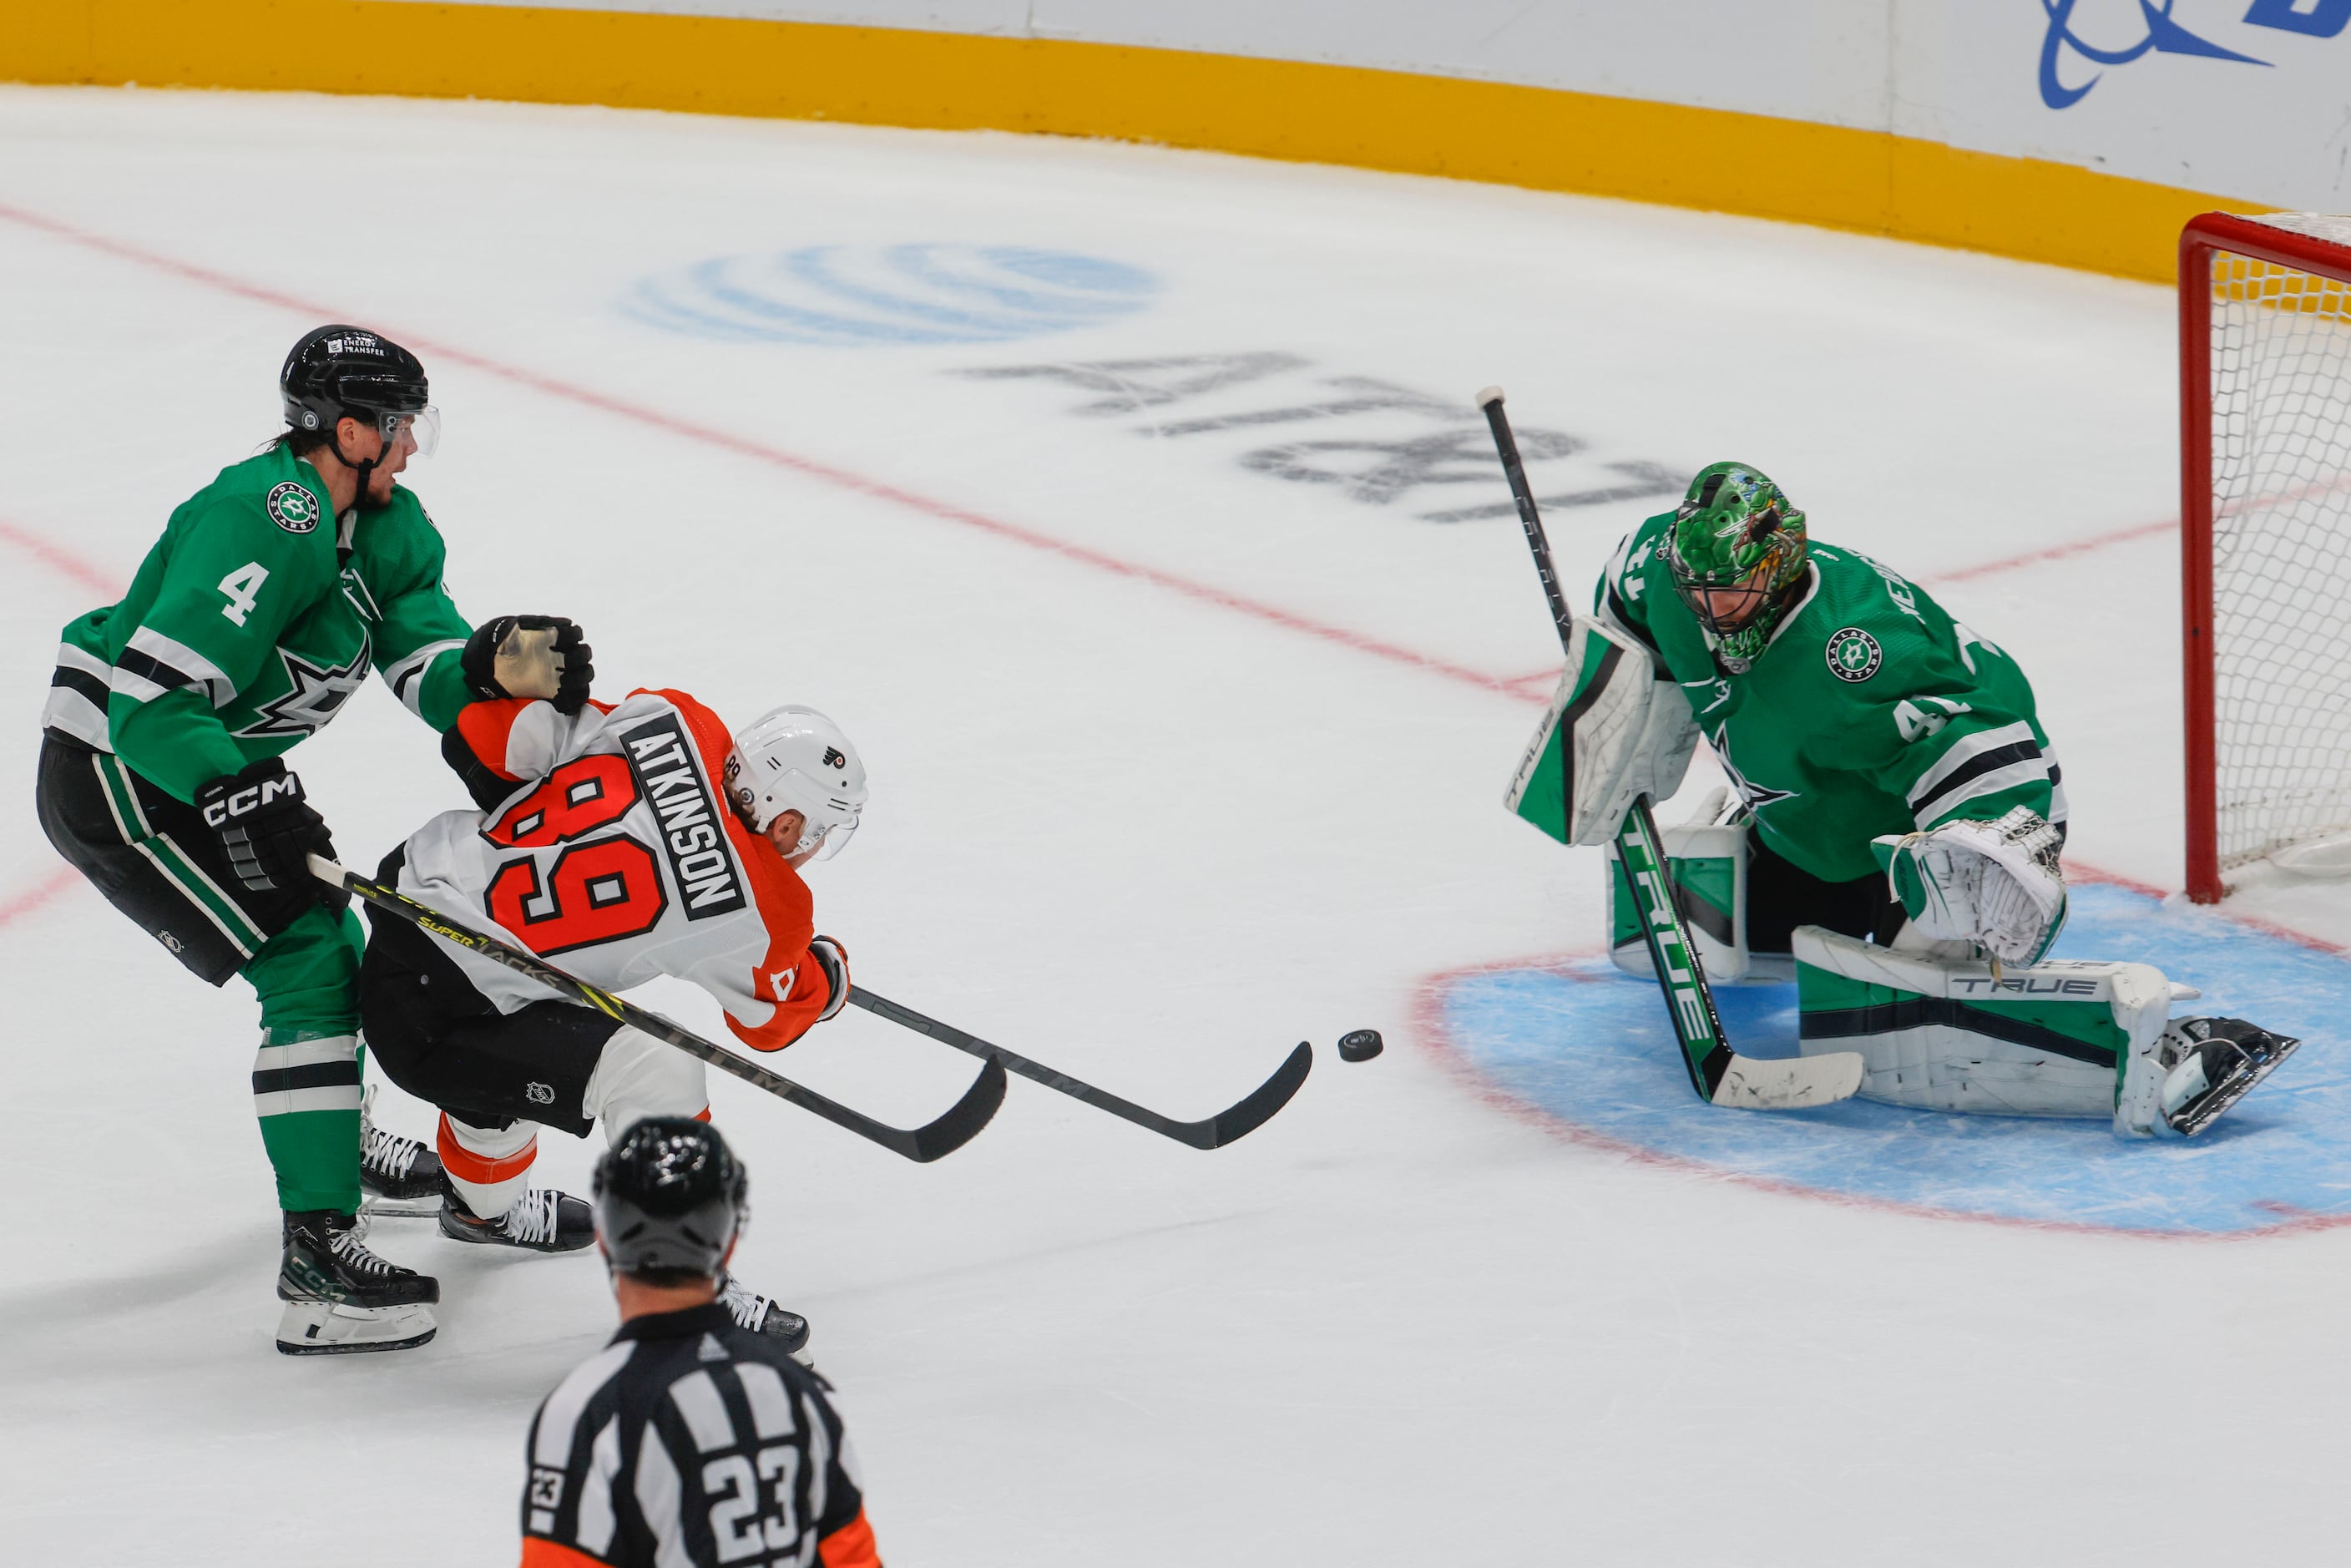 Back on home ice: See photos from the Dallas Stars' overtime win